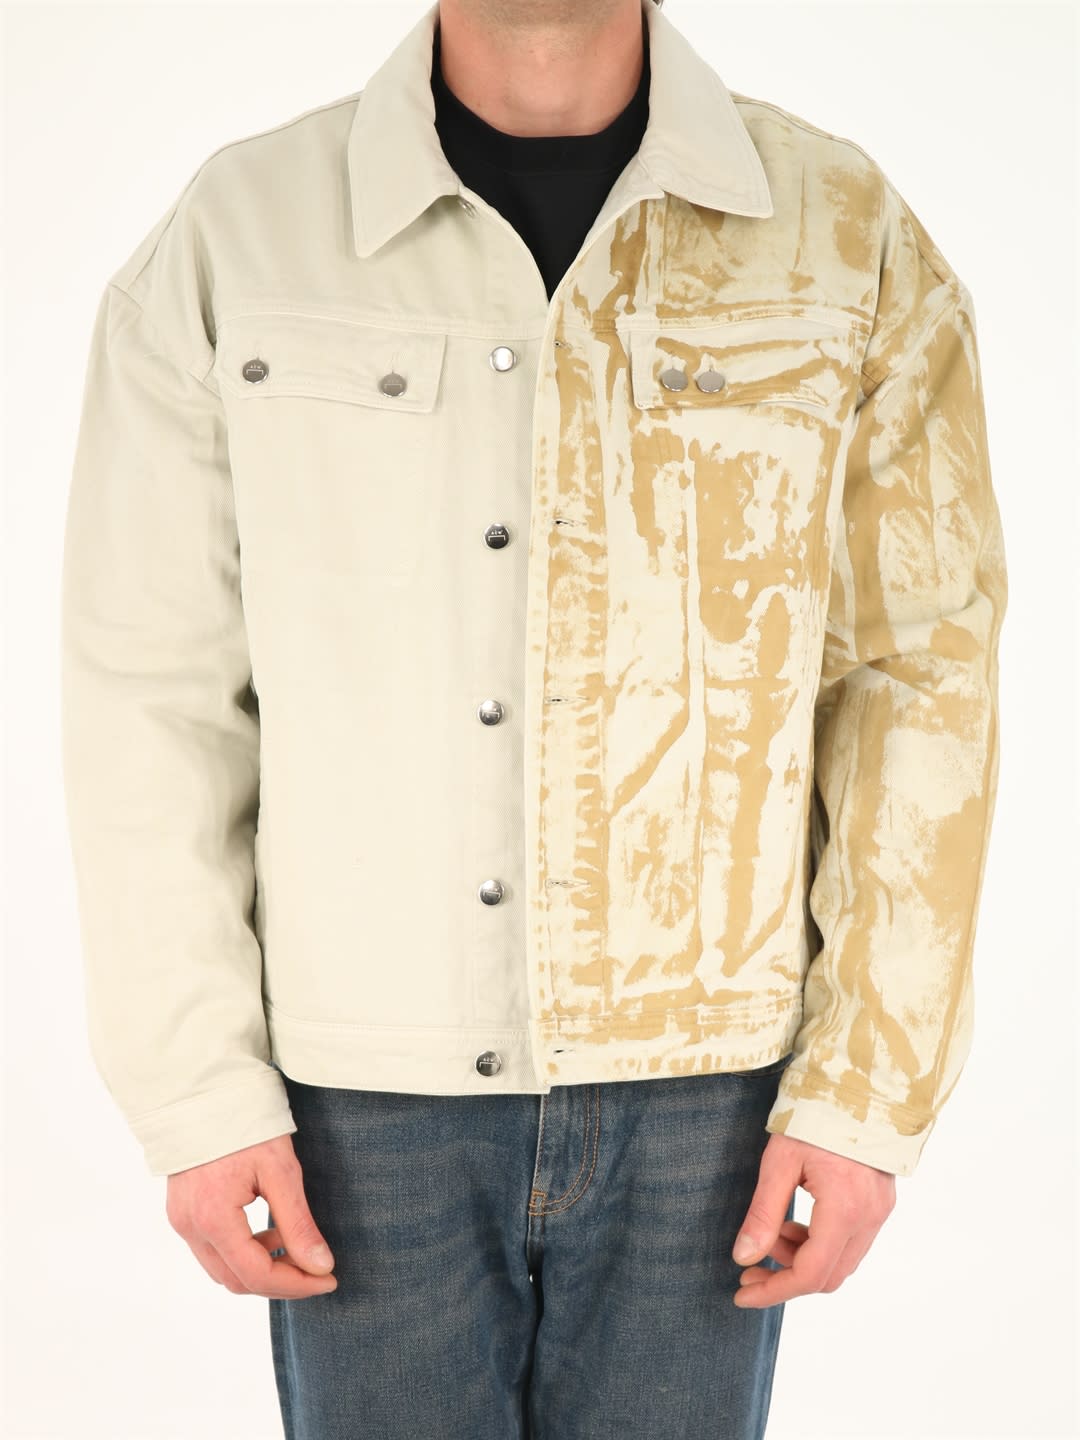 A-COLD-WALL Corrosion Trucker Jacket